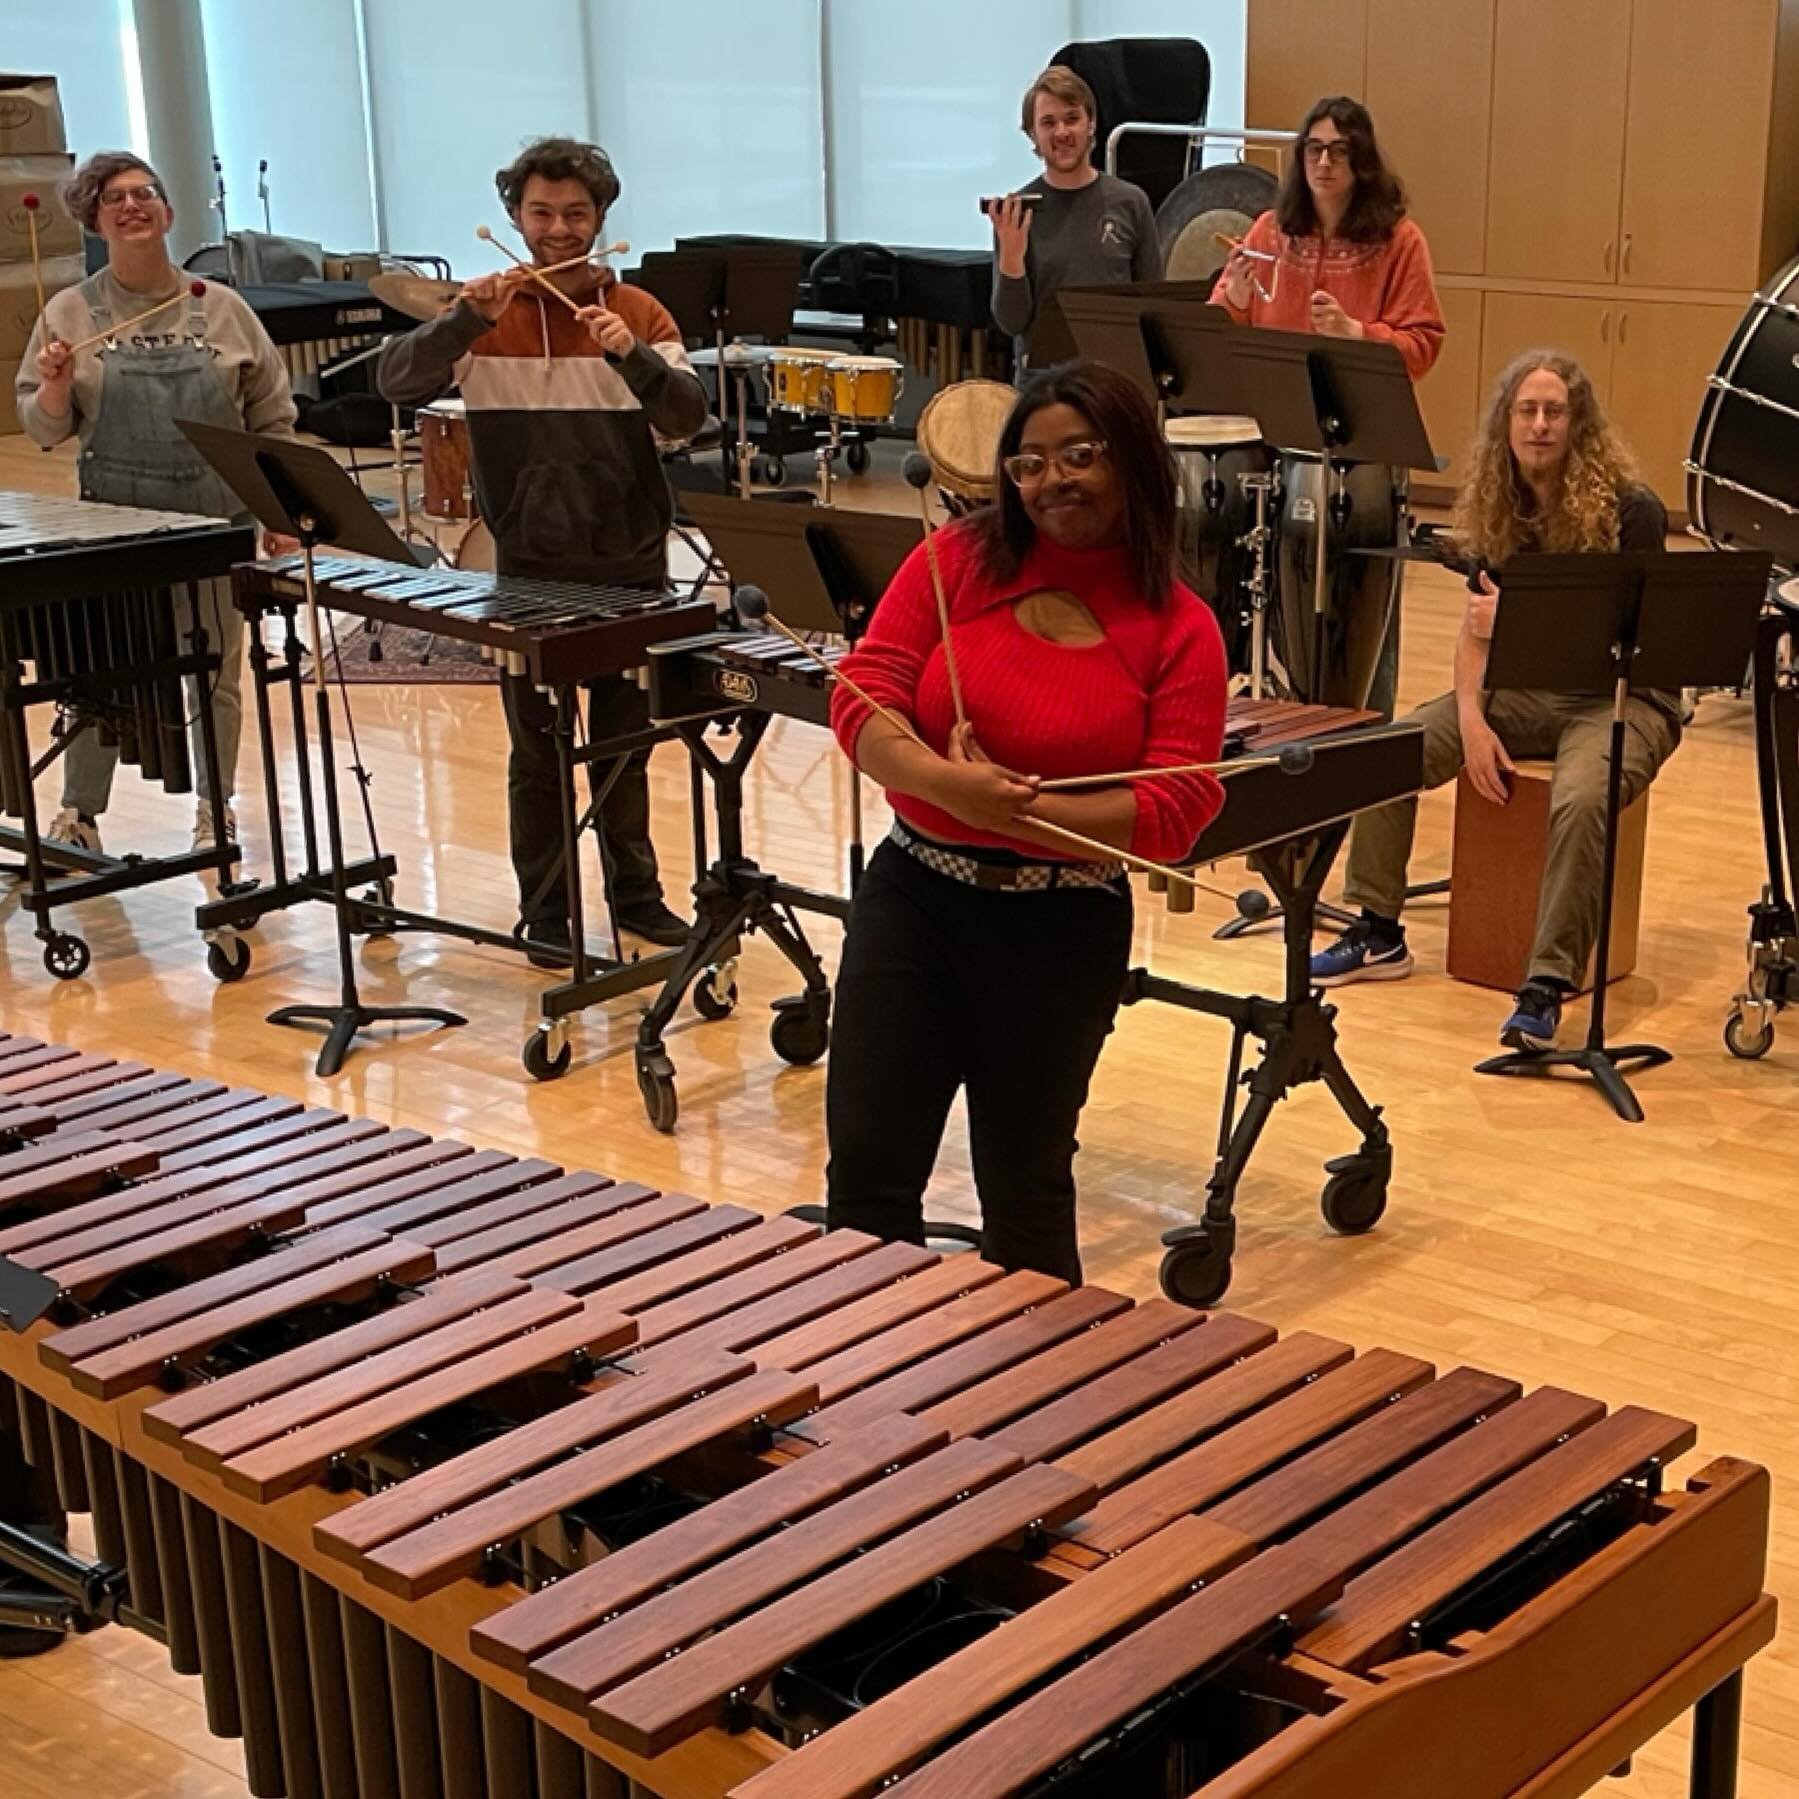 strike a pose 📸 Aaliyah rehearsing &ldquo;plusFIVE&rdquo; by @joshgottry for her senior recital 🤘 much more this Sunday at 5pm!
...
..
.
#easternpercussionstudio #musicateastern #marimbamonday #marimba #marimbasolo #mallets #malletpercussion #malle